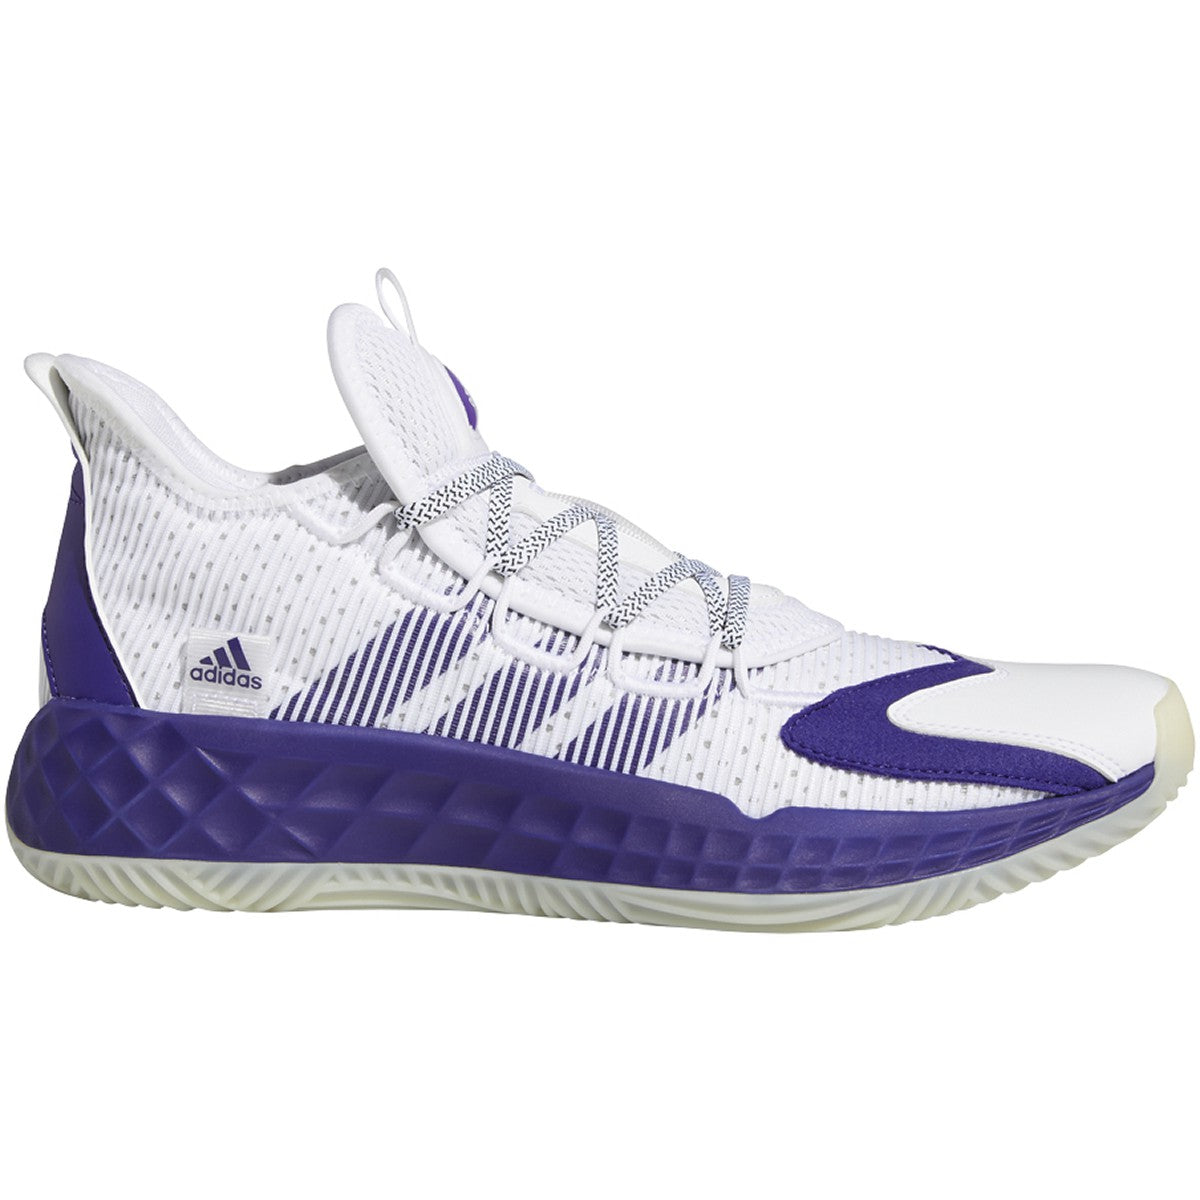 adidas low basketball shoes